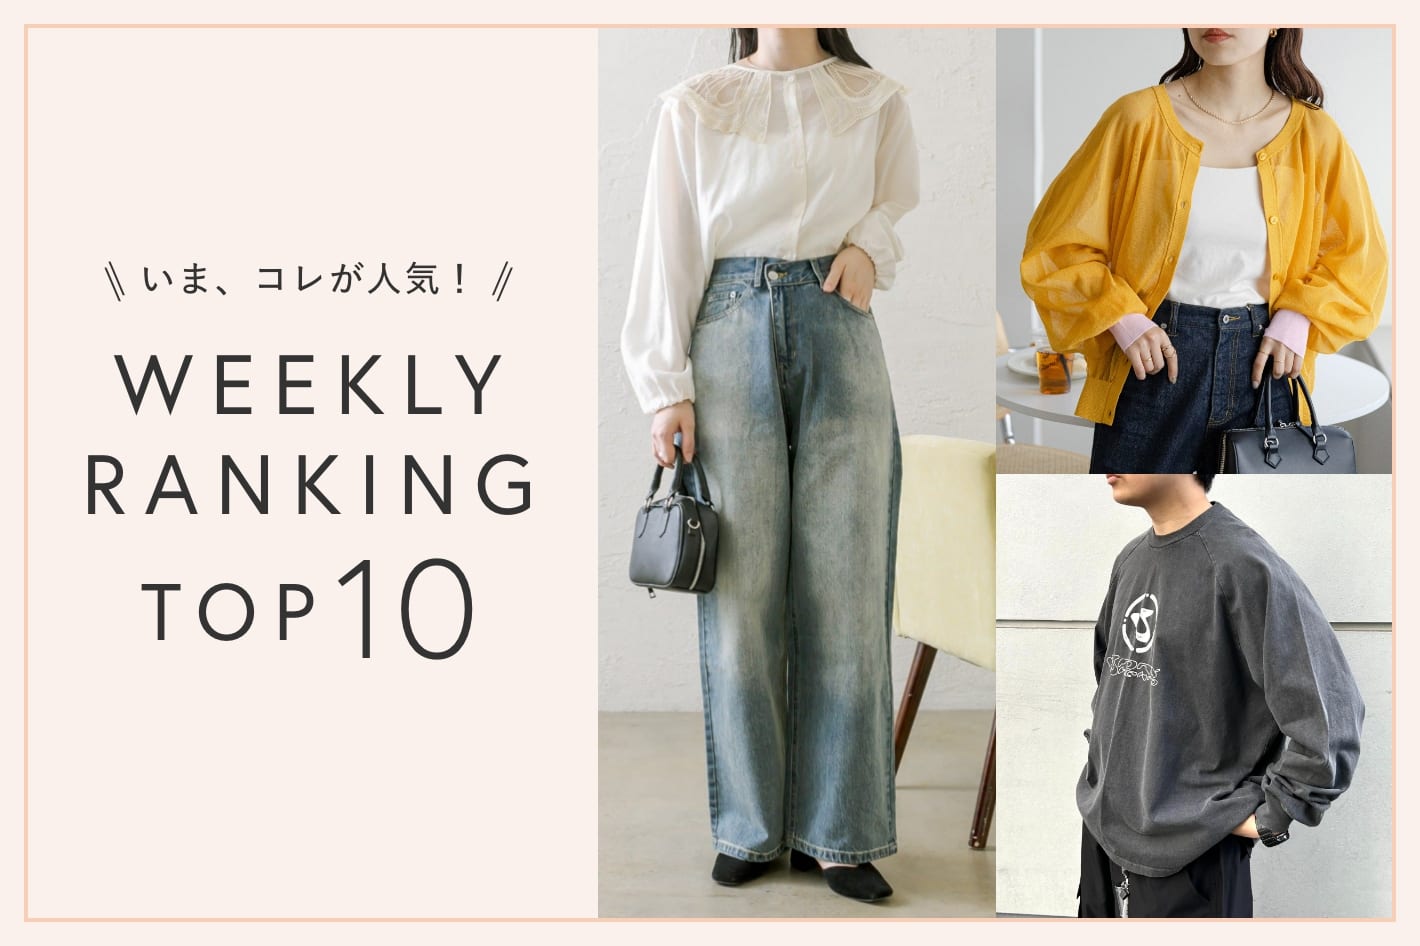 OUTLET いま、これが人気！WEEKLY RANKING TOP10！【5/29更新】